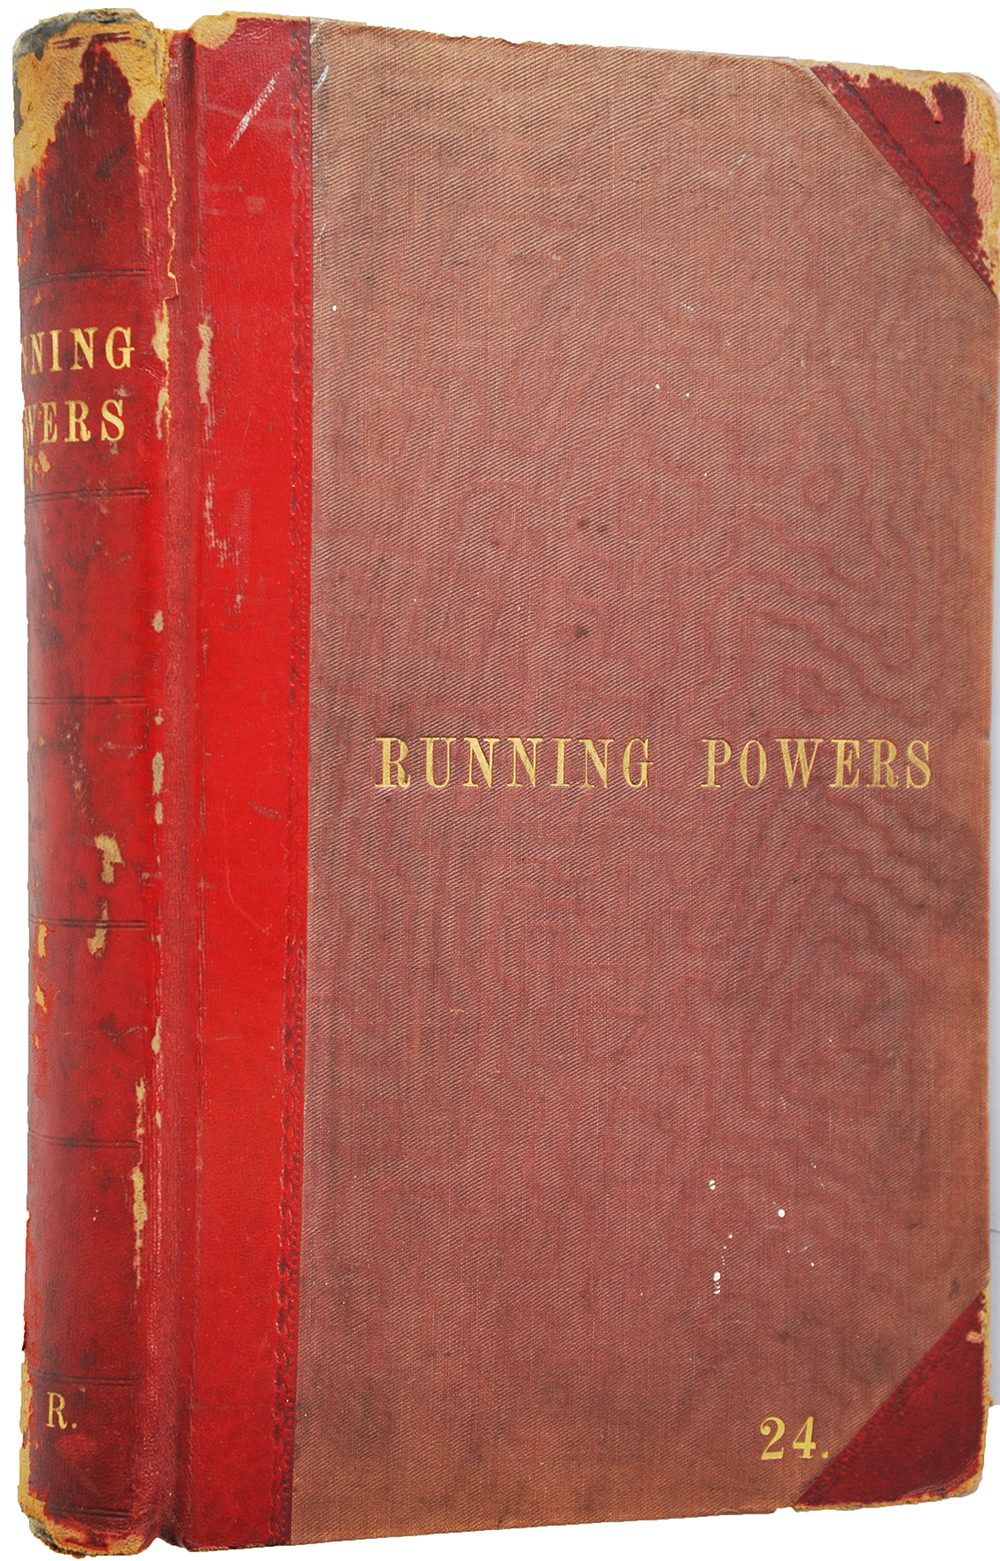 GWR Running Powers Book No 24. A quite stunning hardback book compiled at the General Managers